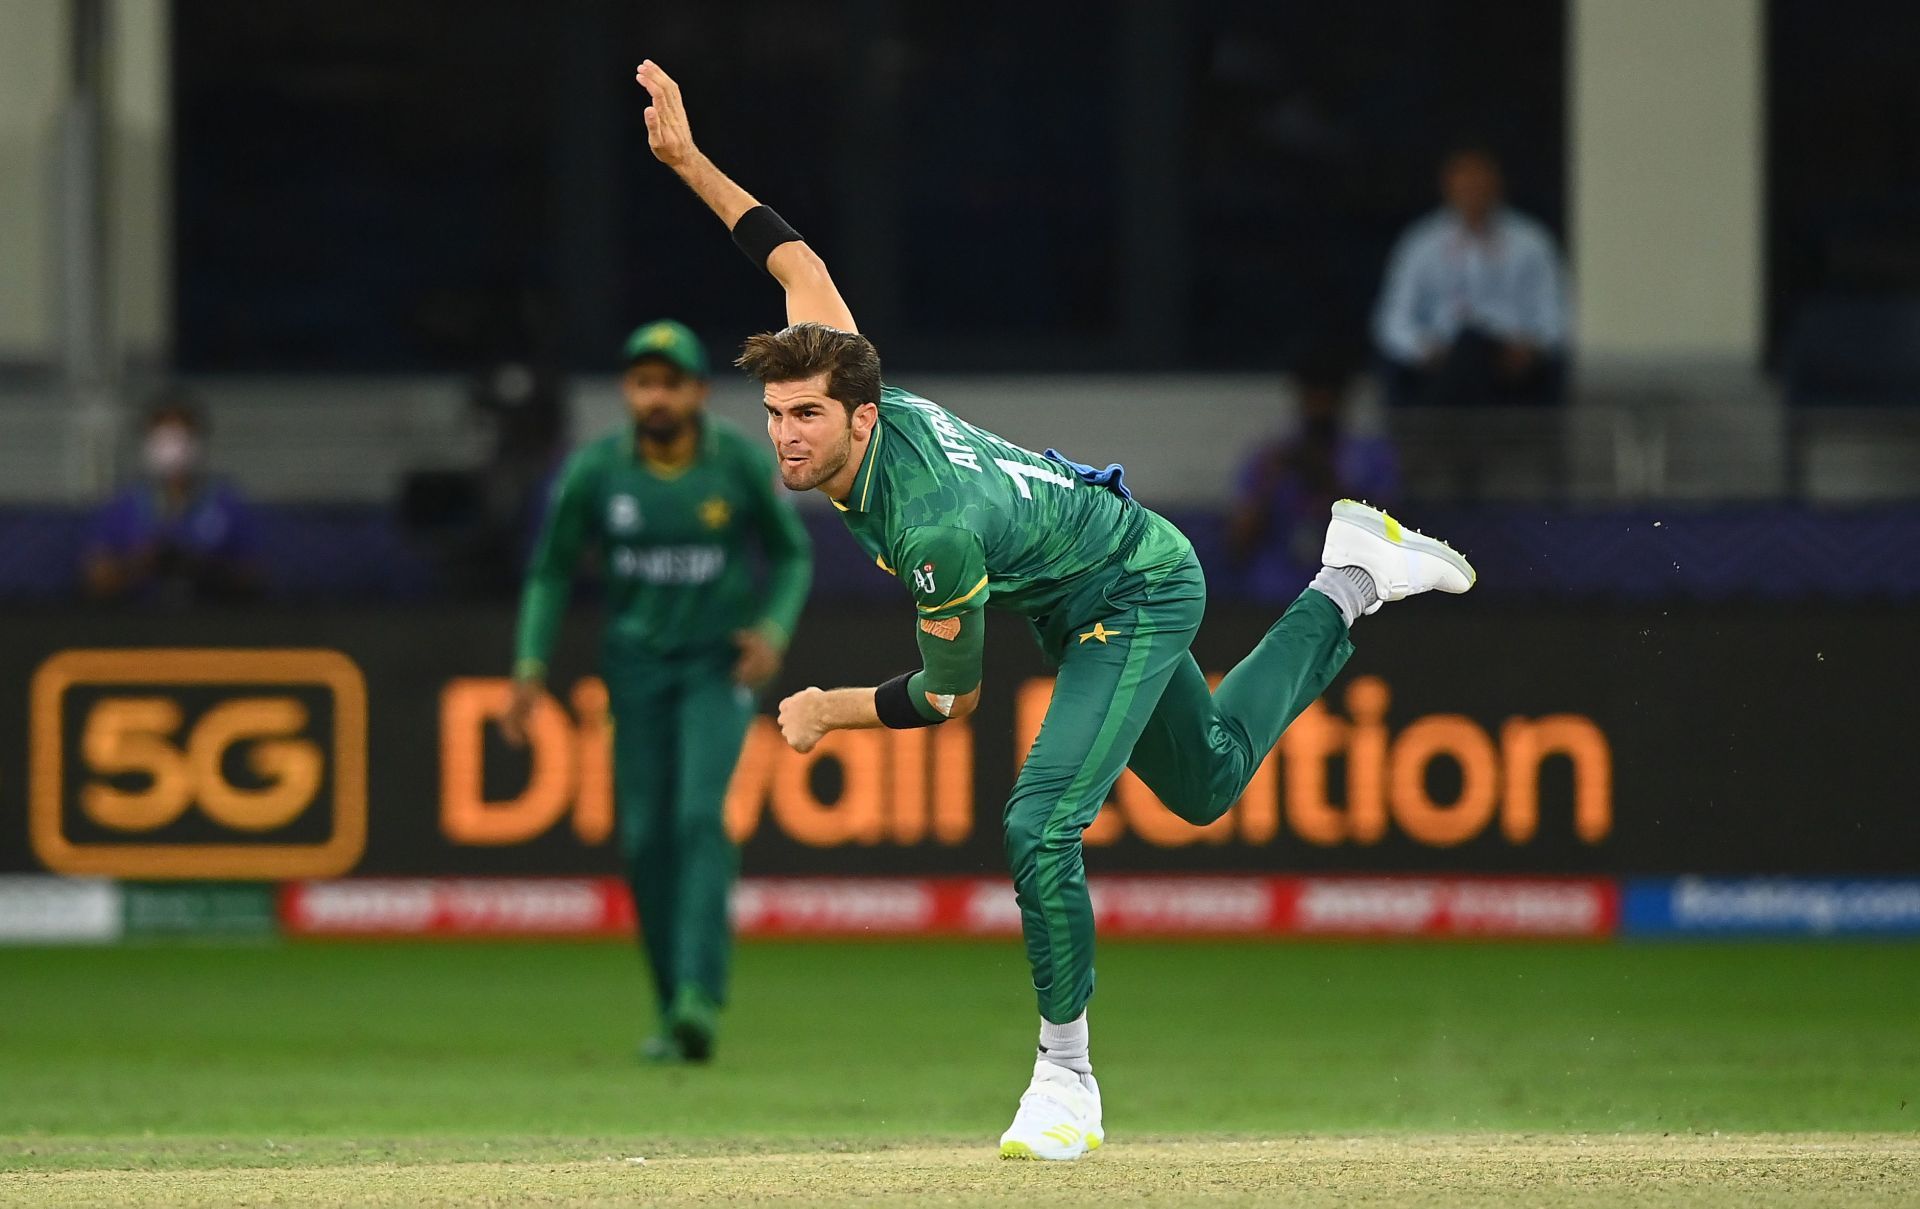 Pakistan left-arm pacer Shaheen Afridi. Pic: Getty Images